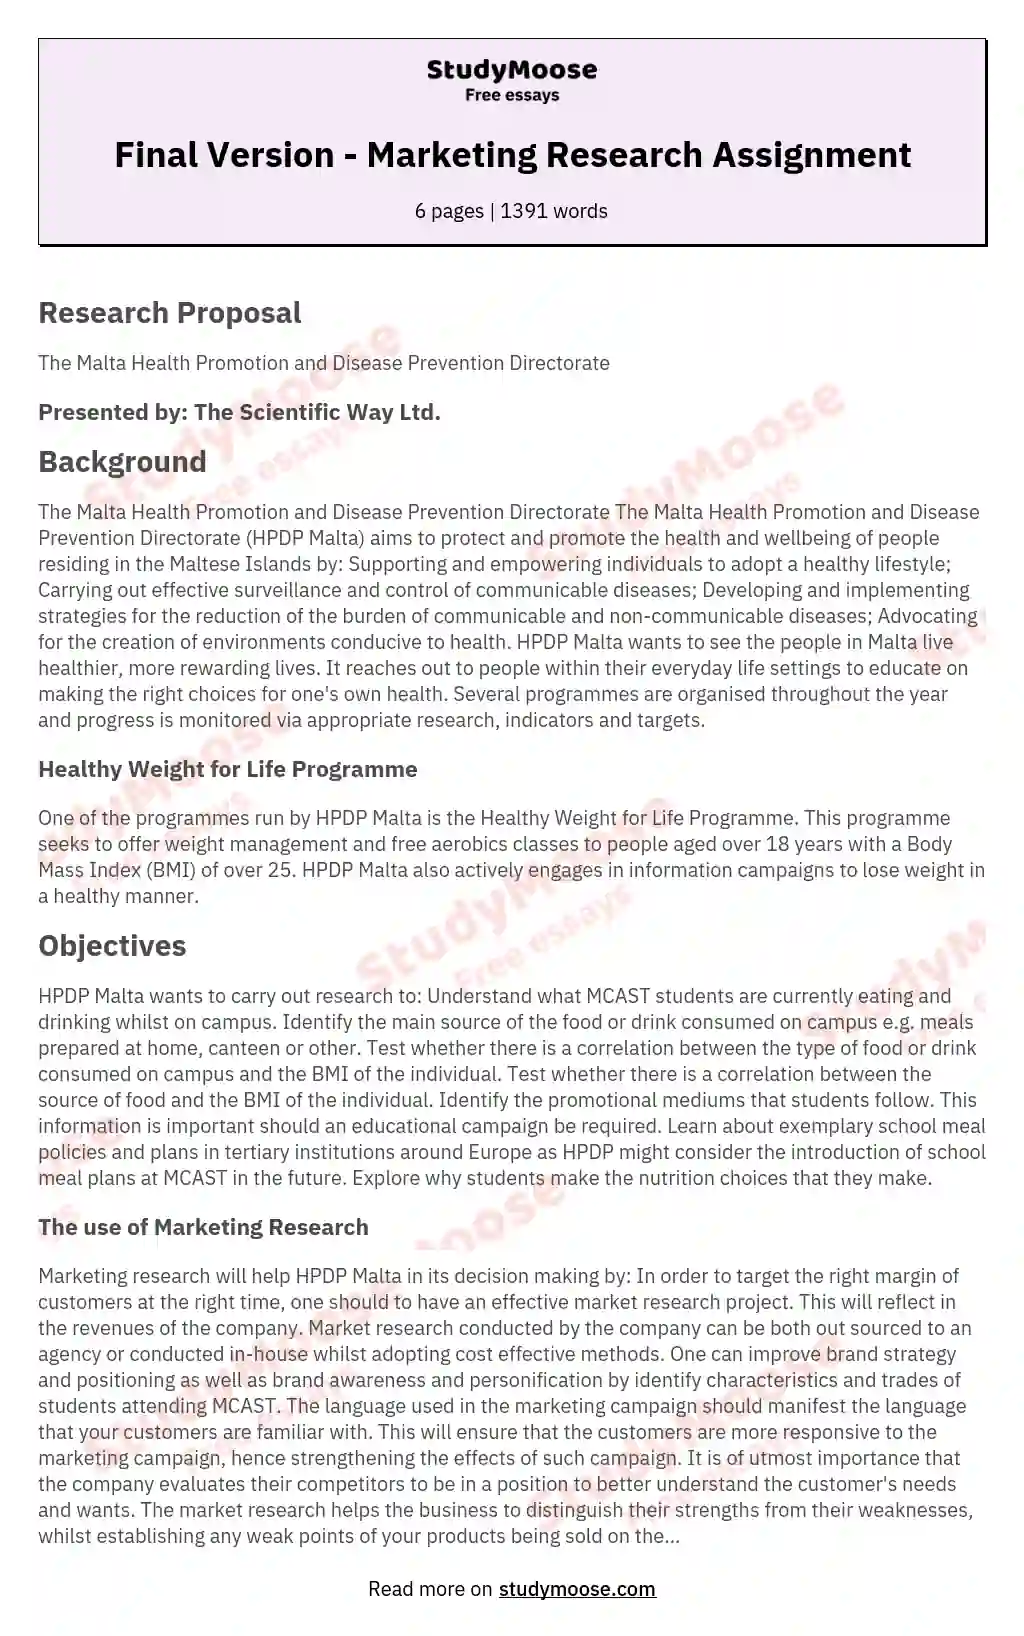 marketing research assignment pdf